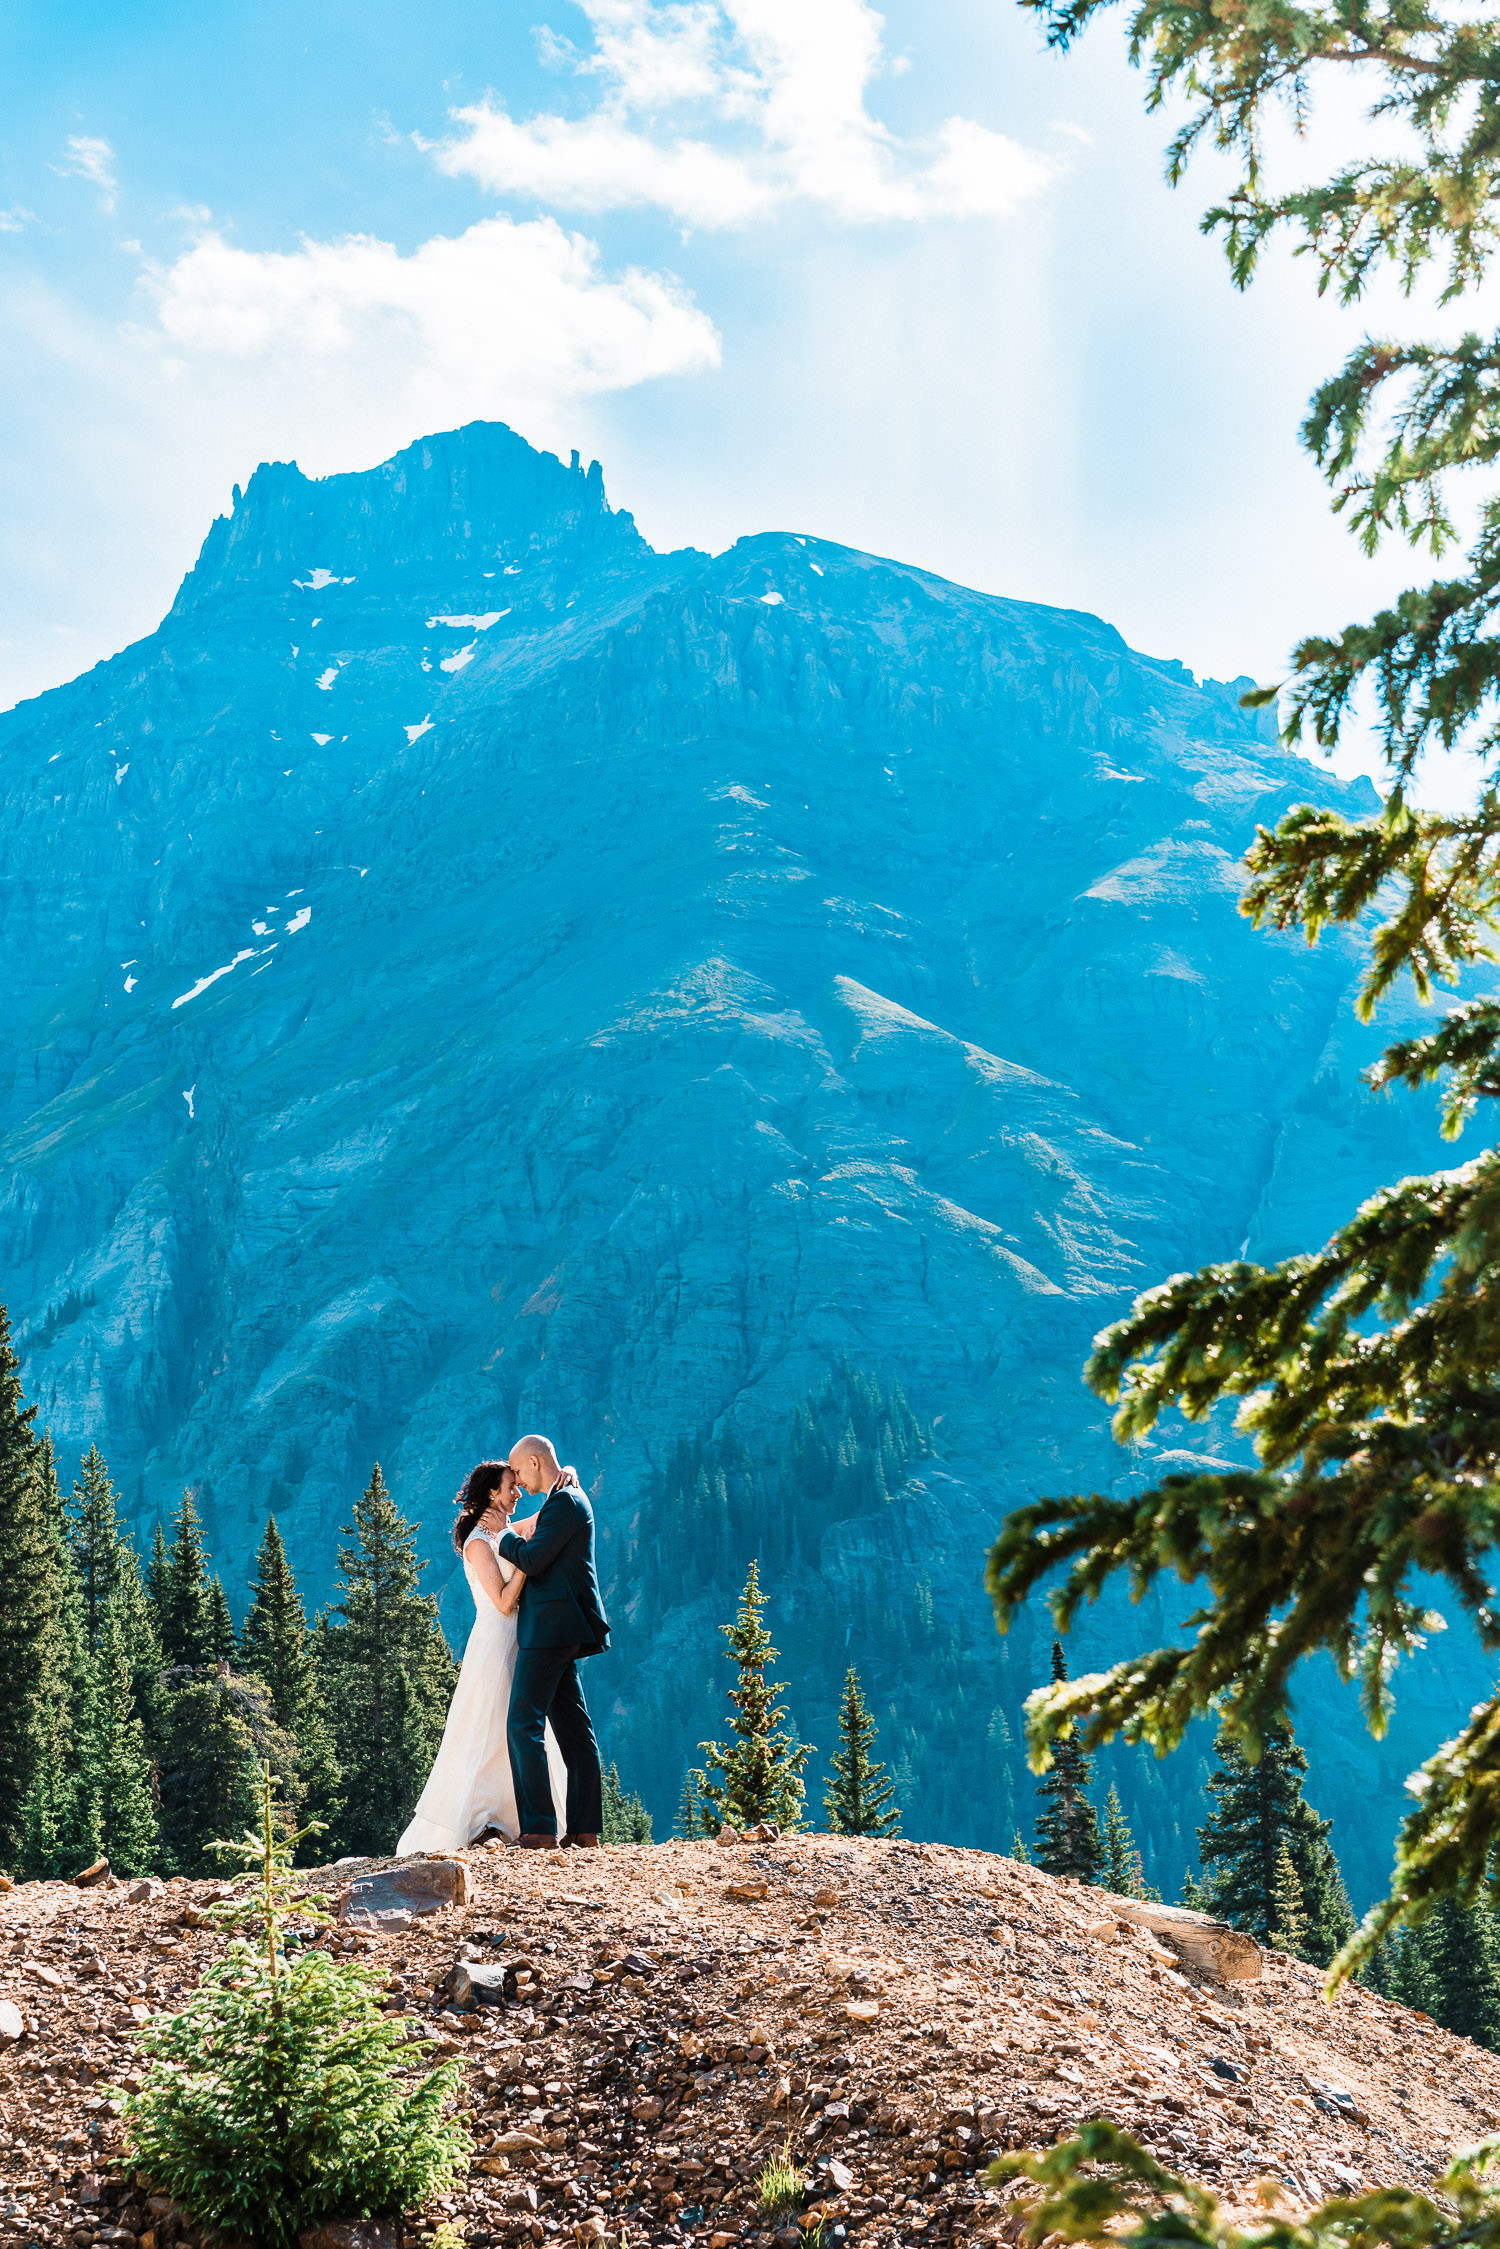 A bride and groom pose on a mountain top in Colorado